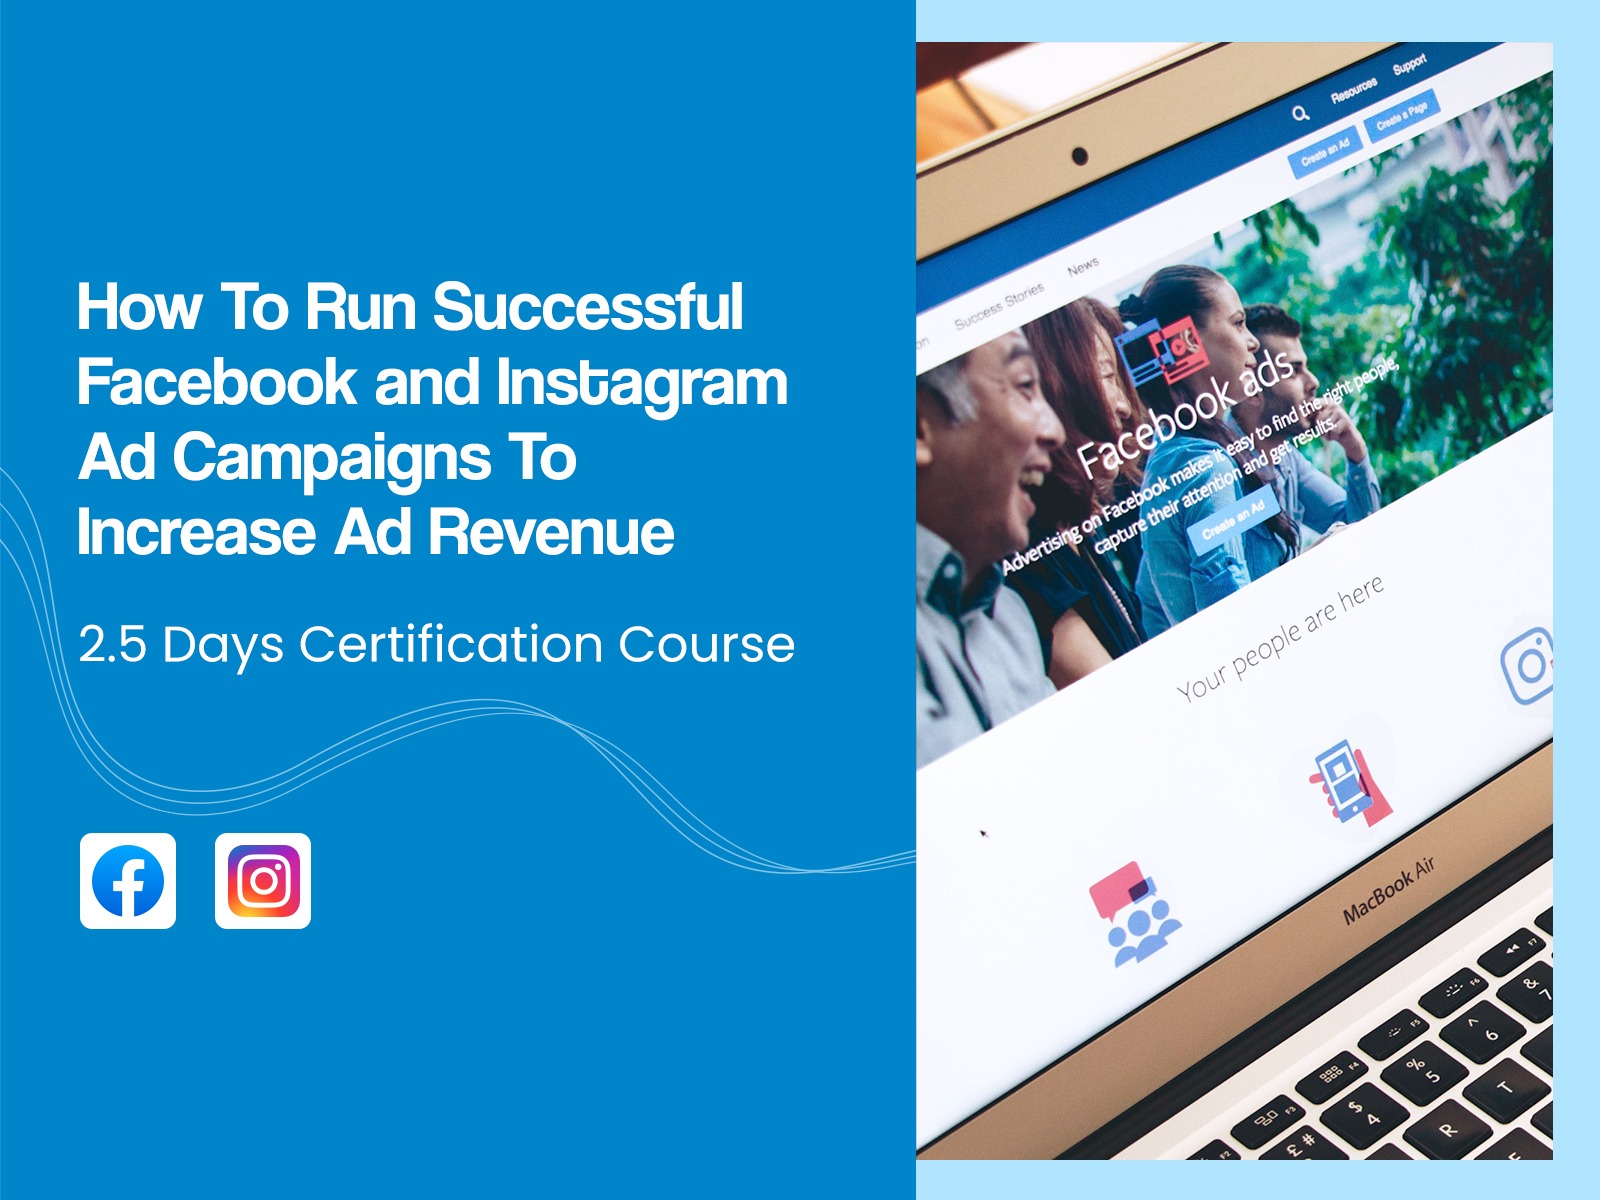 How To Run Successful Facebook and Instagram Ad Campaigns To Increase Ad Revenue course in Singapore